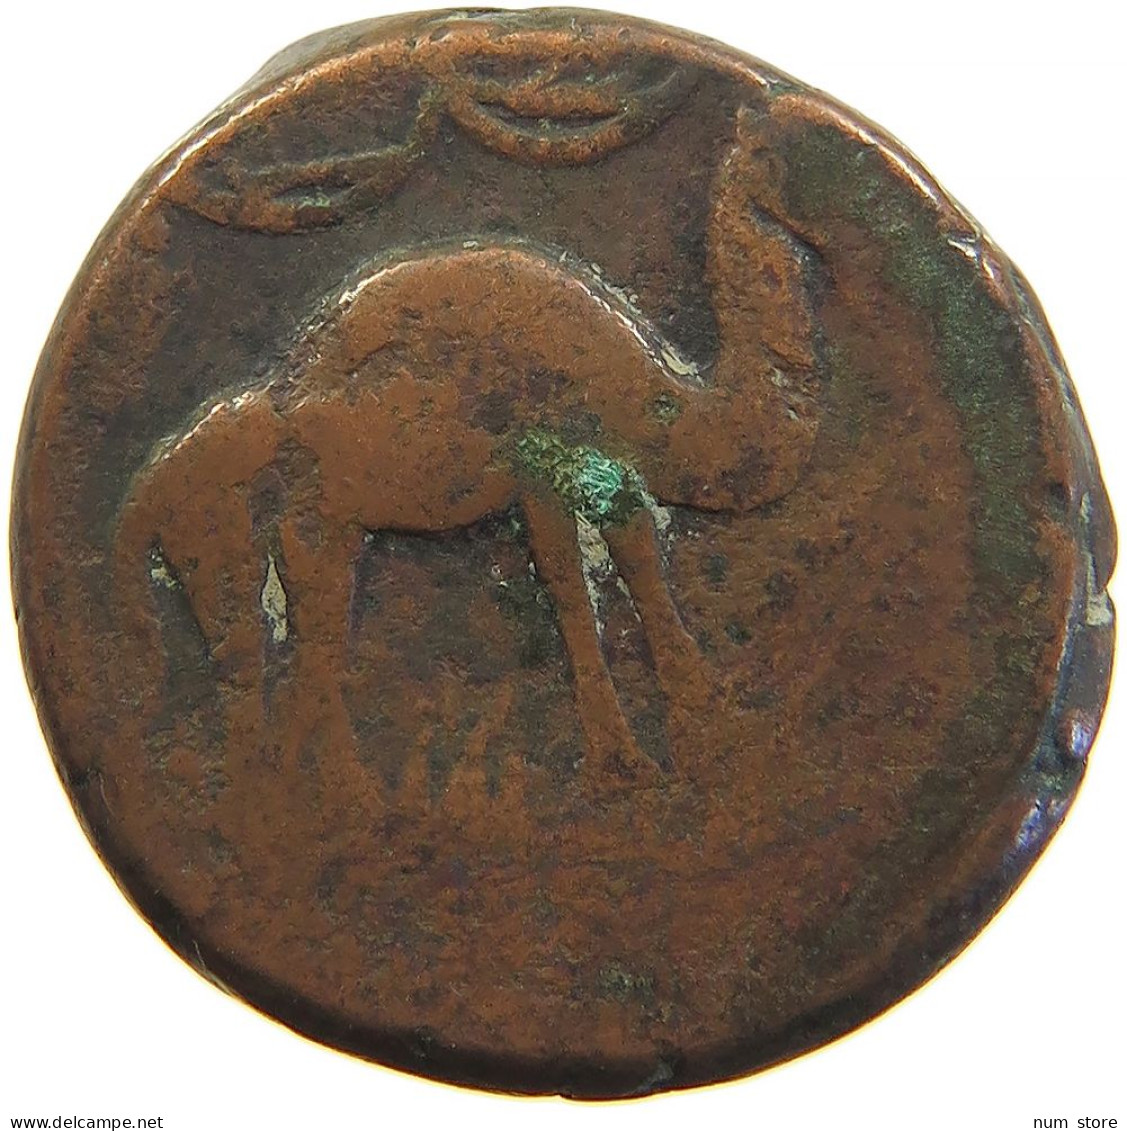 ISLAMIC FALUS FALS CAMEL RIGHT FIGURATIVE COINAGES IRAN / PERSIA / AFGHANISTAN 22MM 9G #t034 0131 - Iran